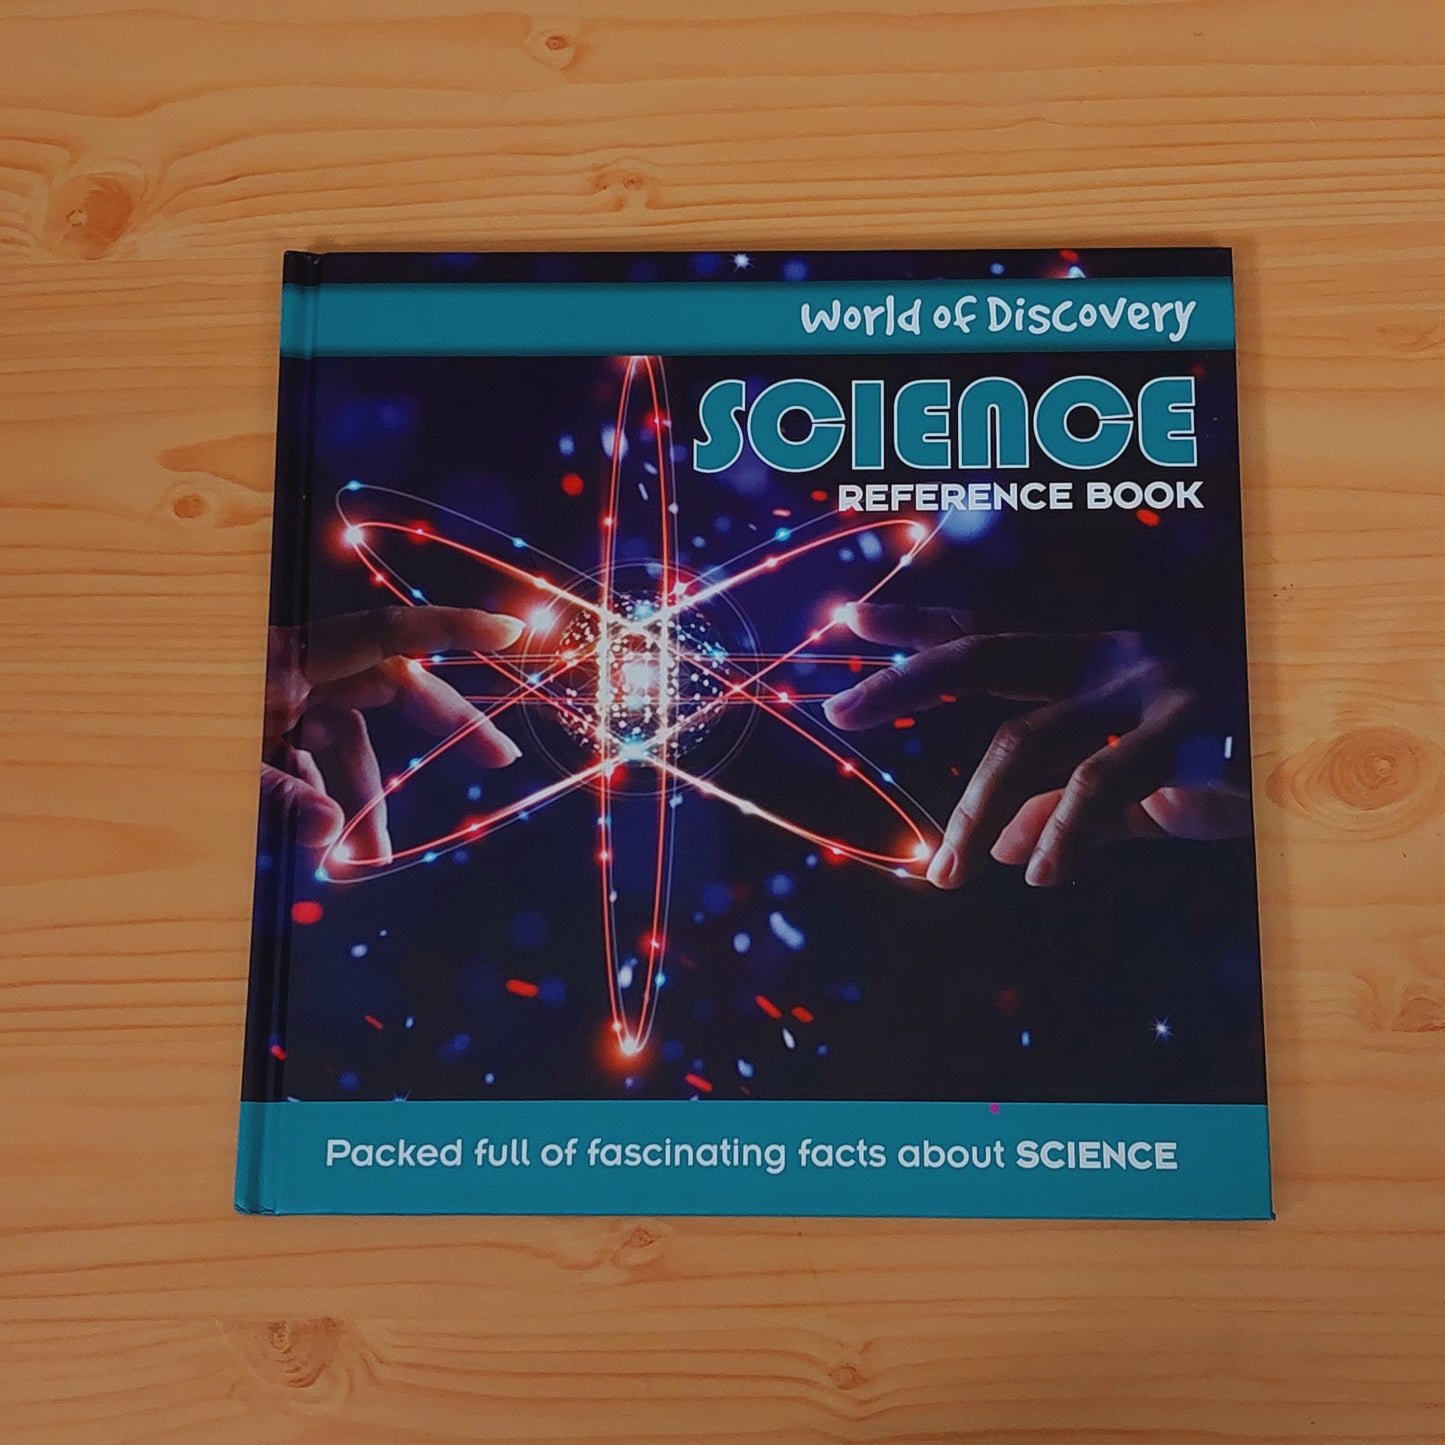 World of Discovery - Science Reference Book